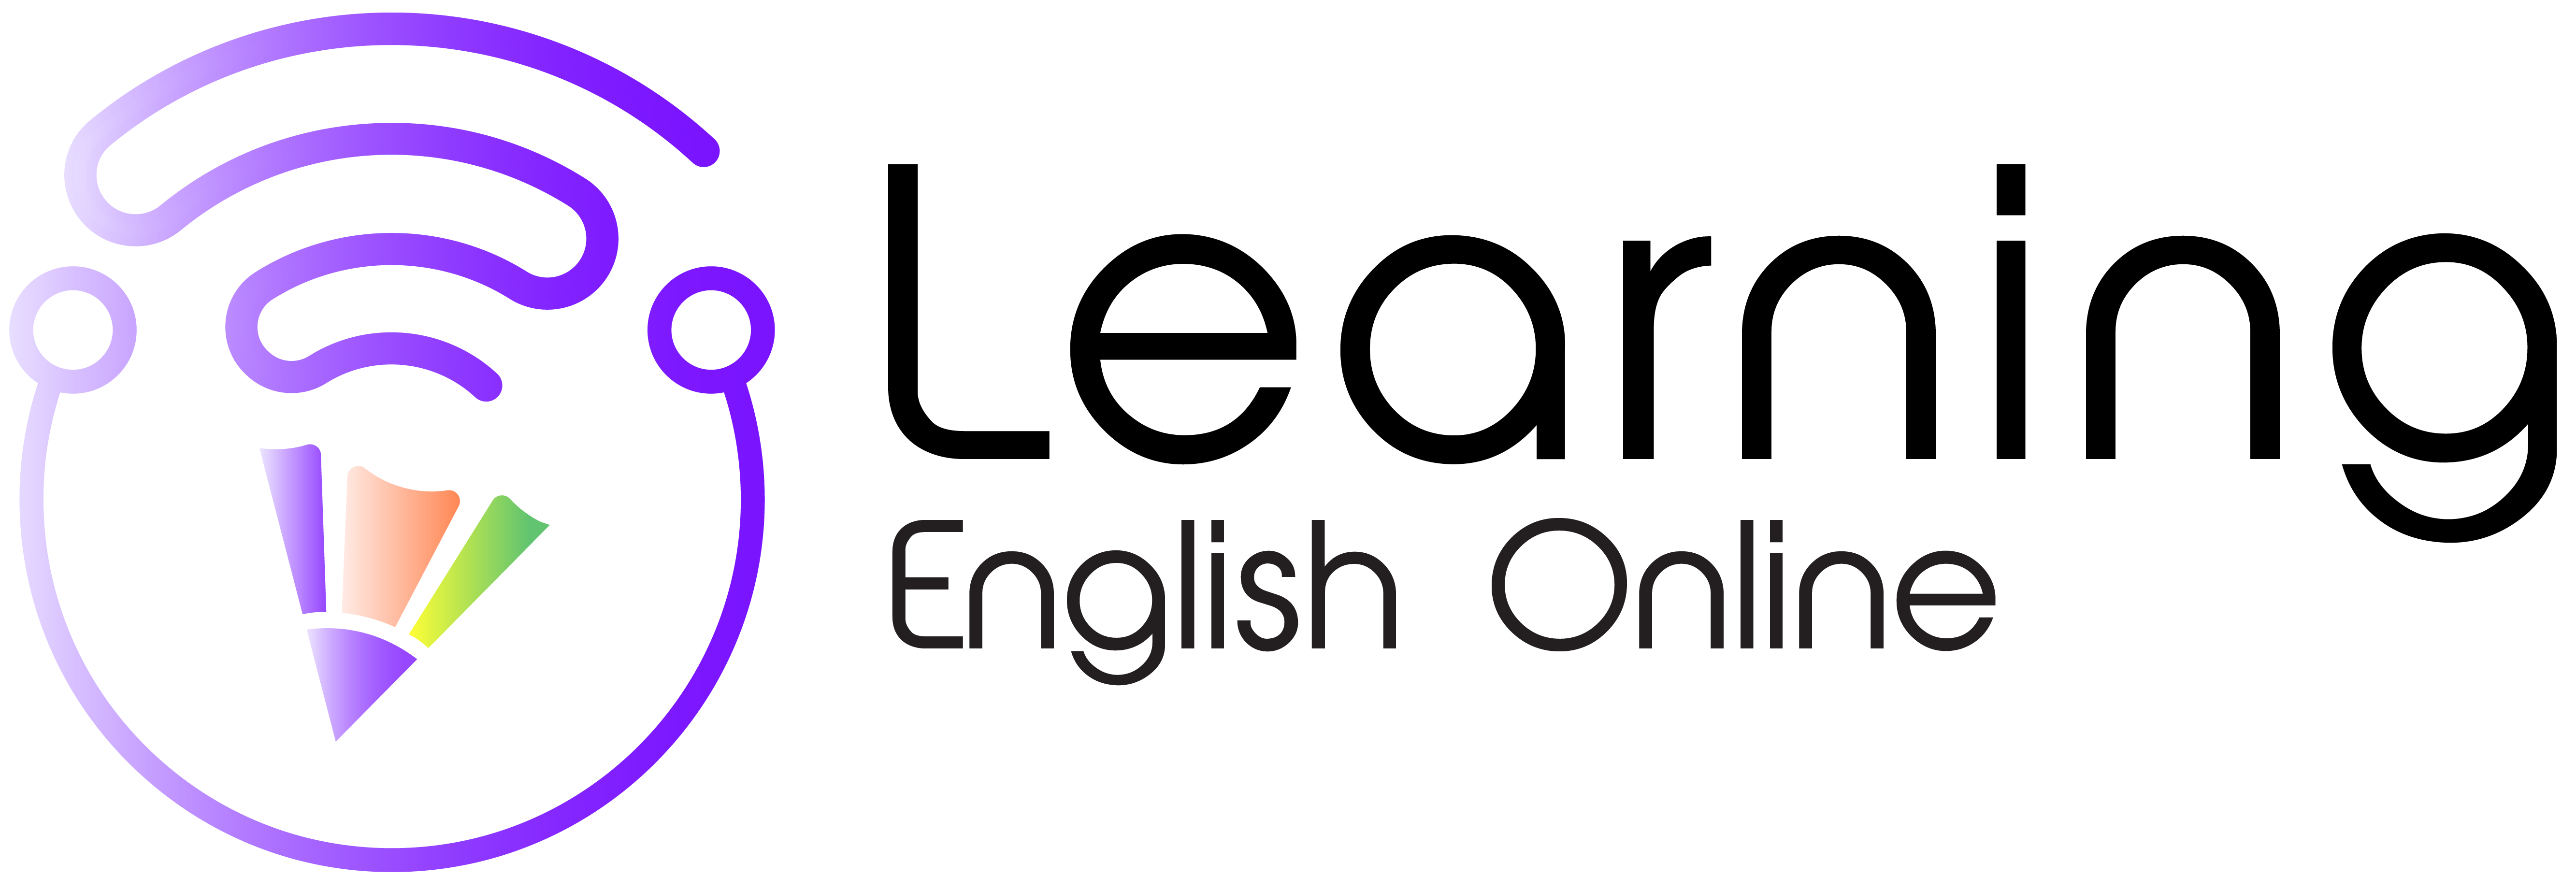 Learn English ONLINE 